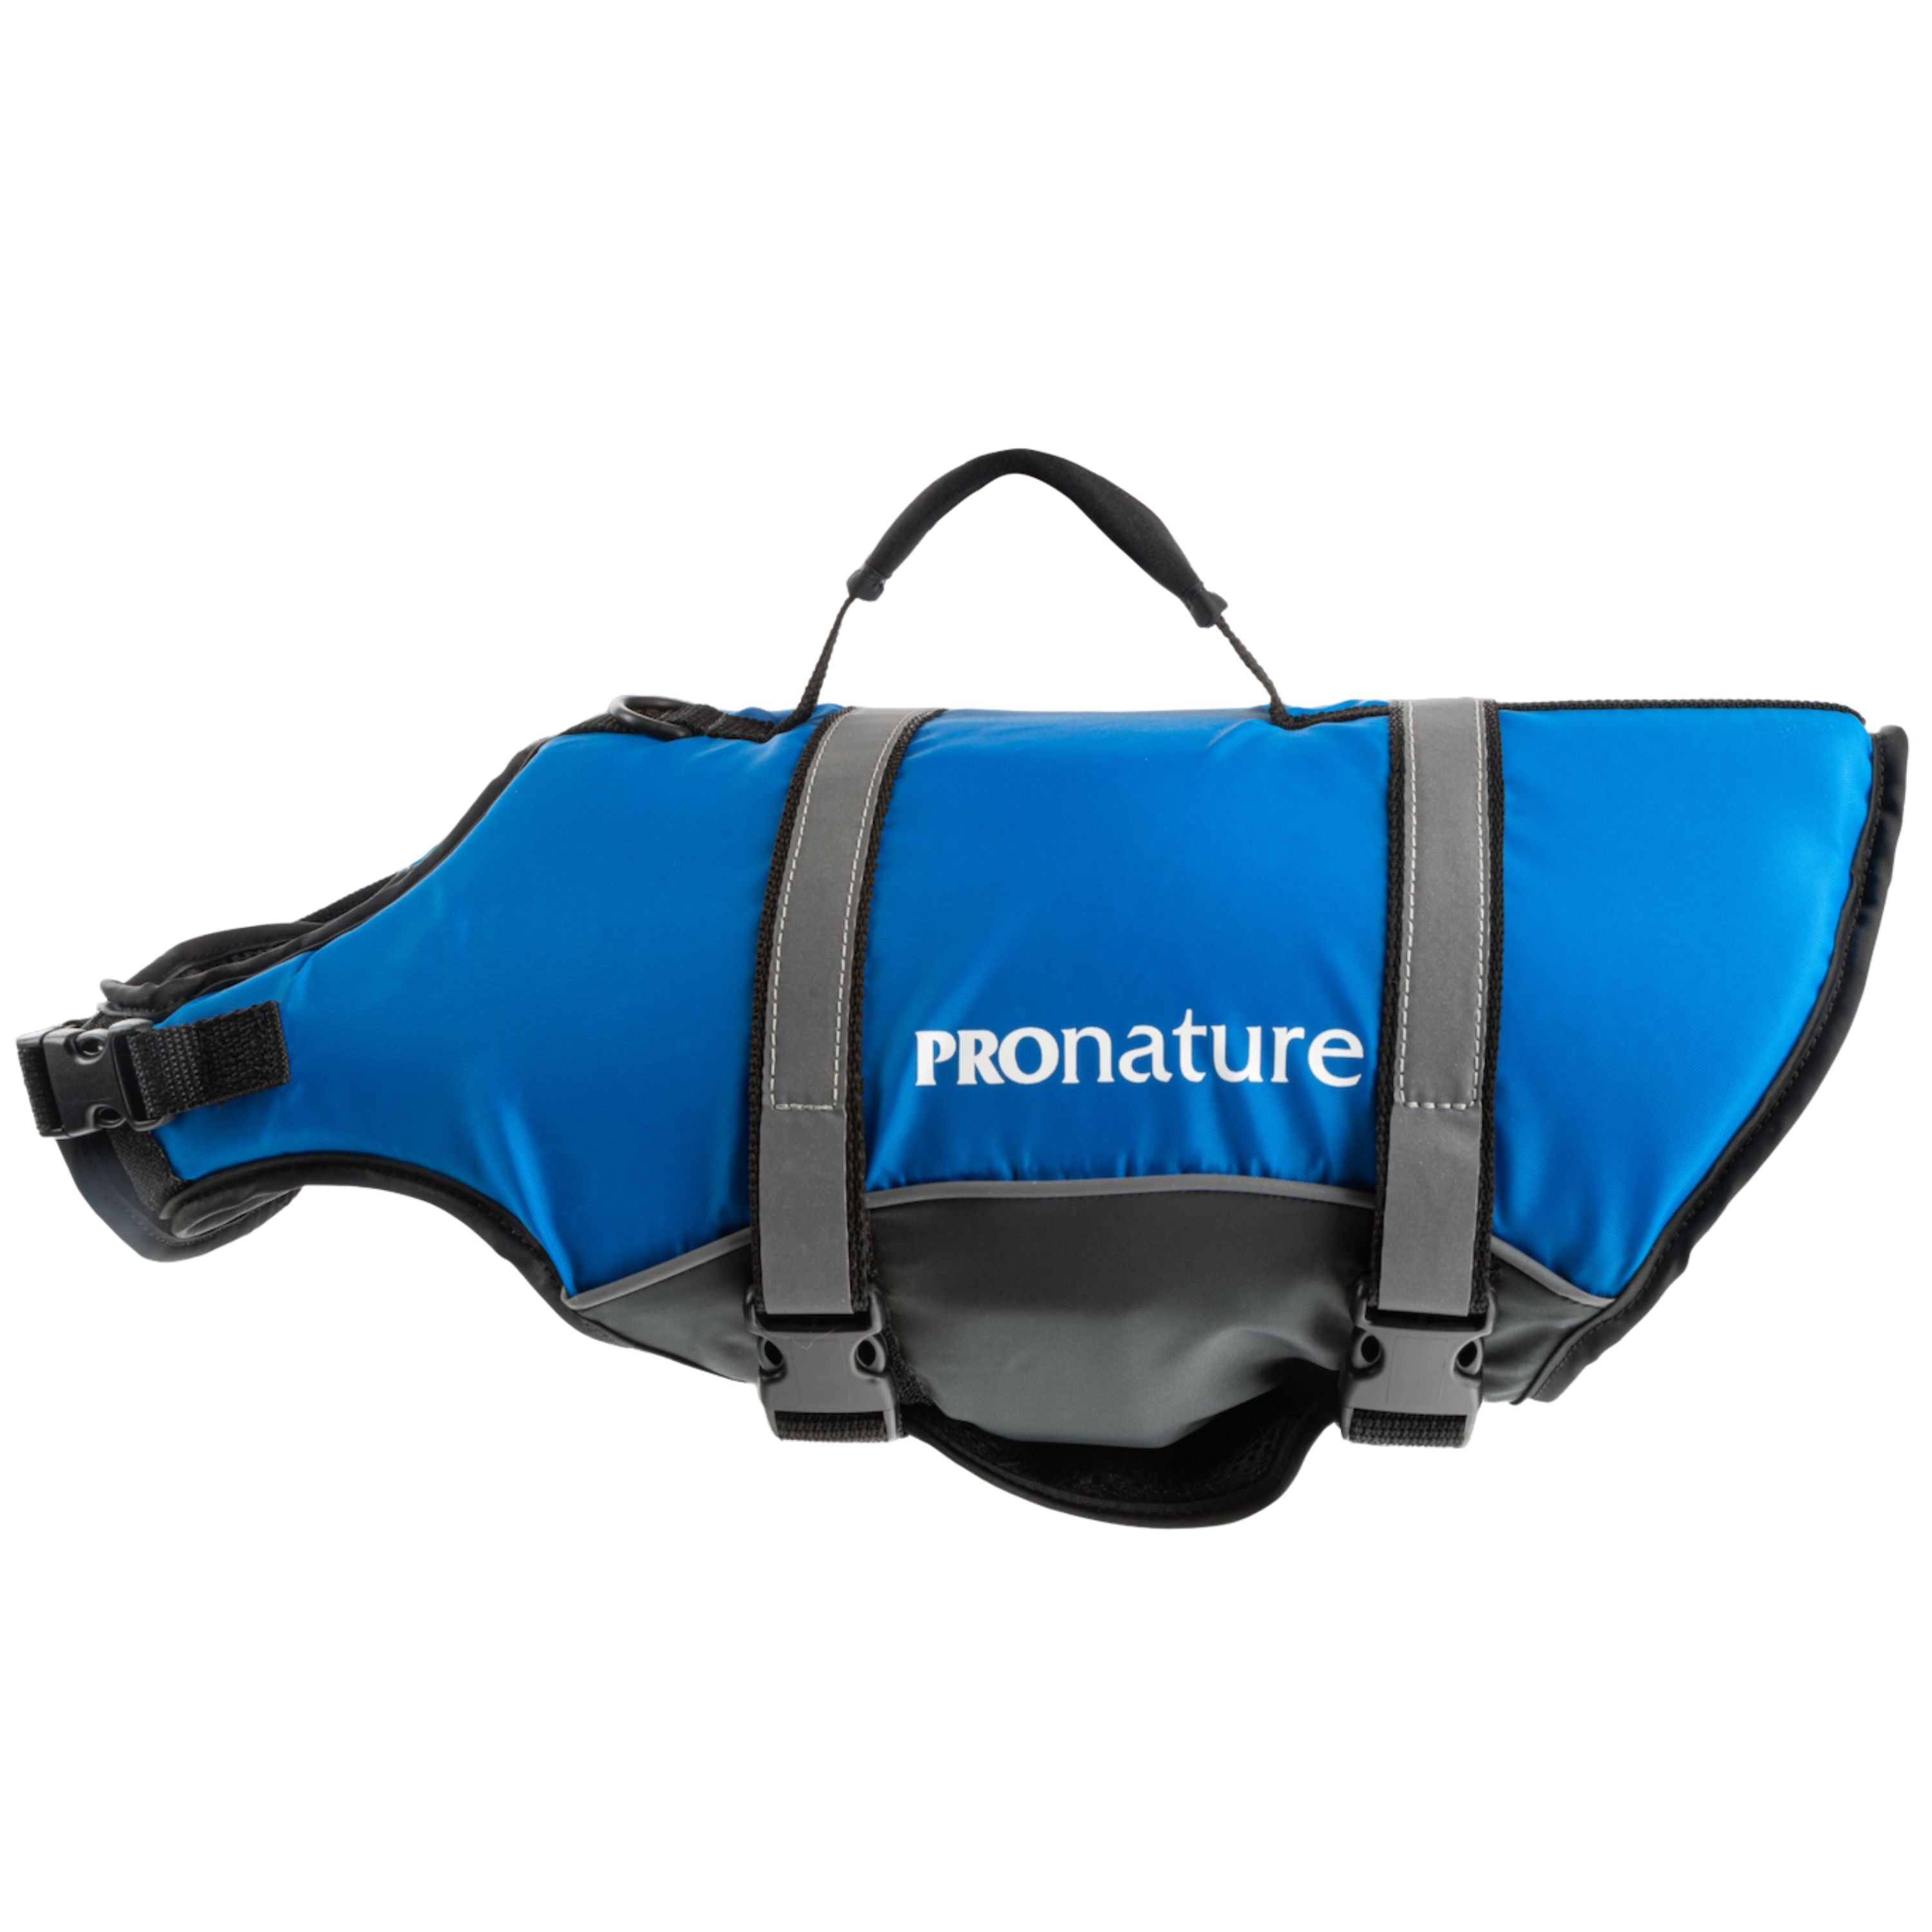 "Water dog" Flotation device for dogs